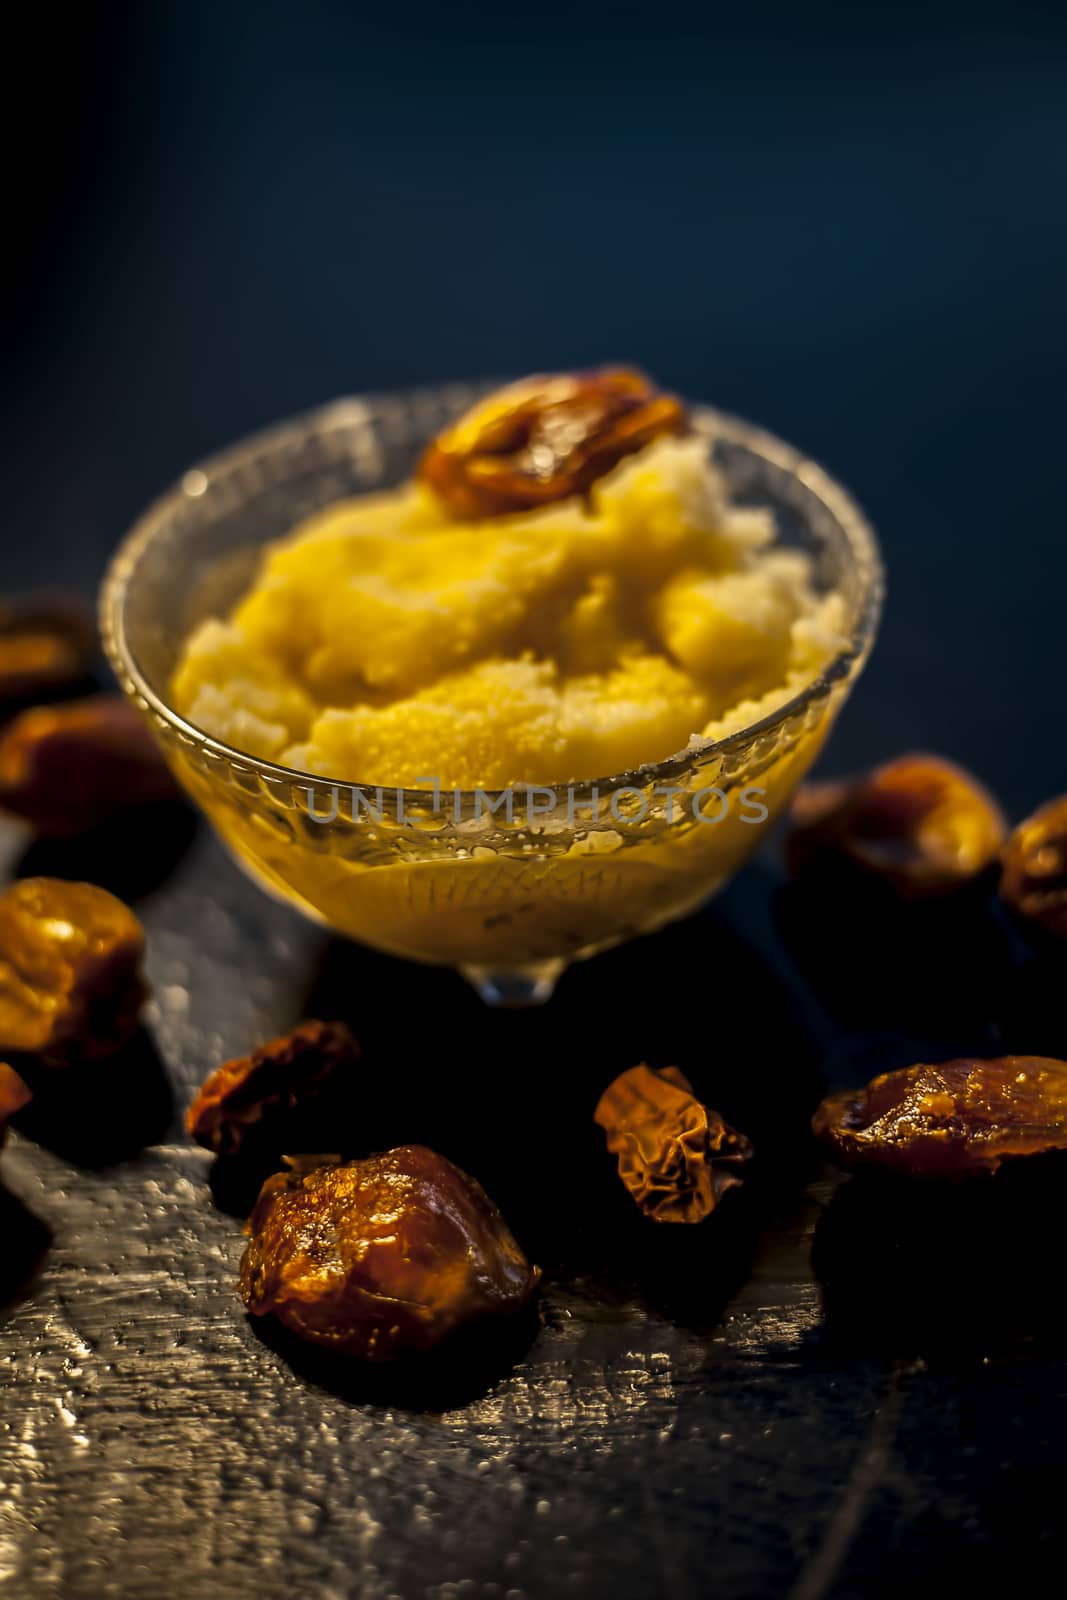 Close up shot of dates soaked in ghee for better stamina and health on black wooden surface along with ghee or clarified butter. Vertical shot.